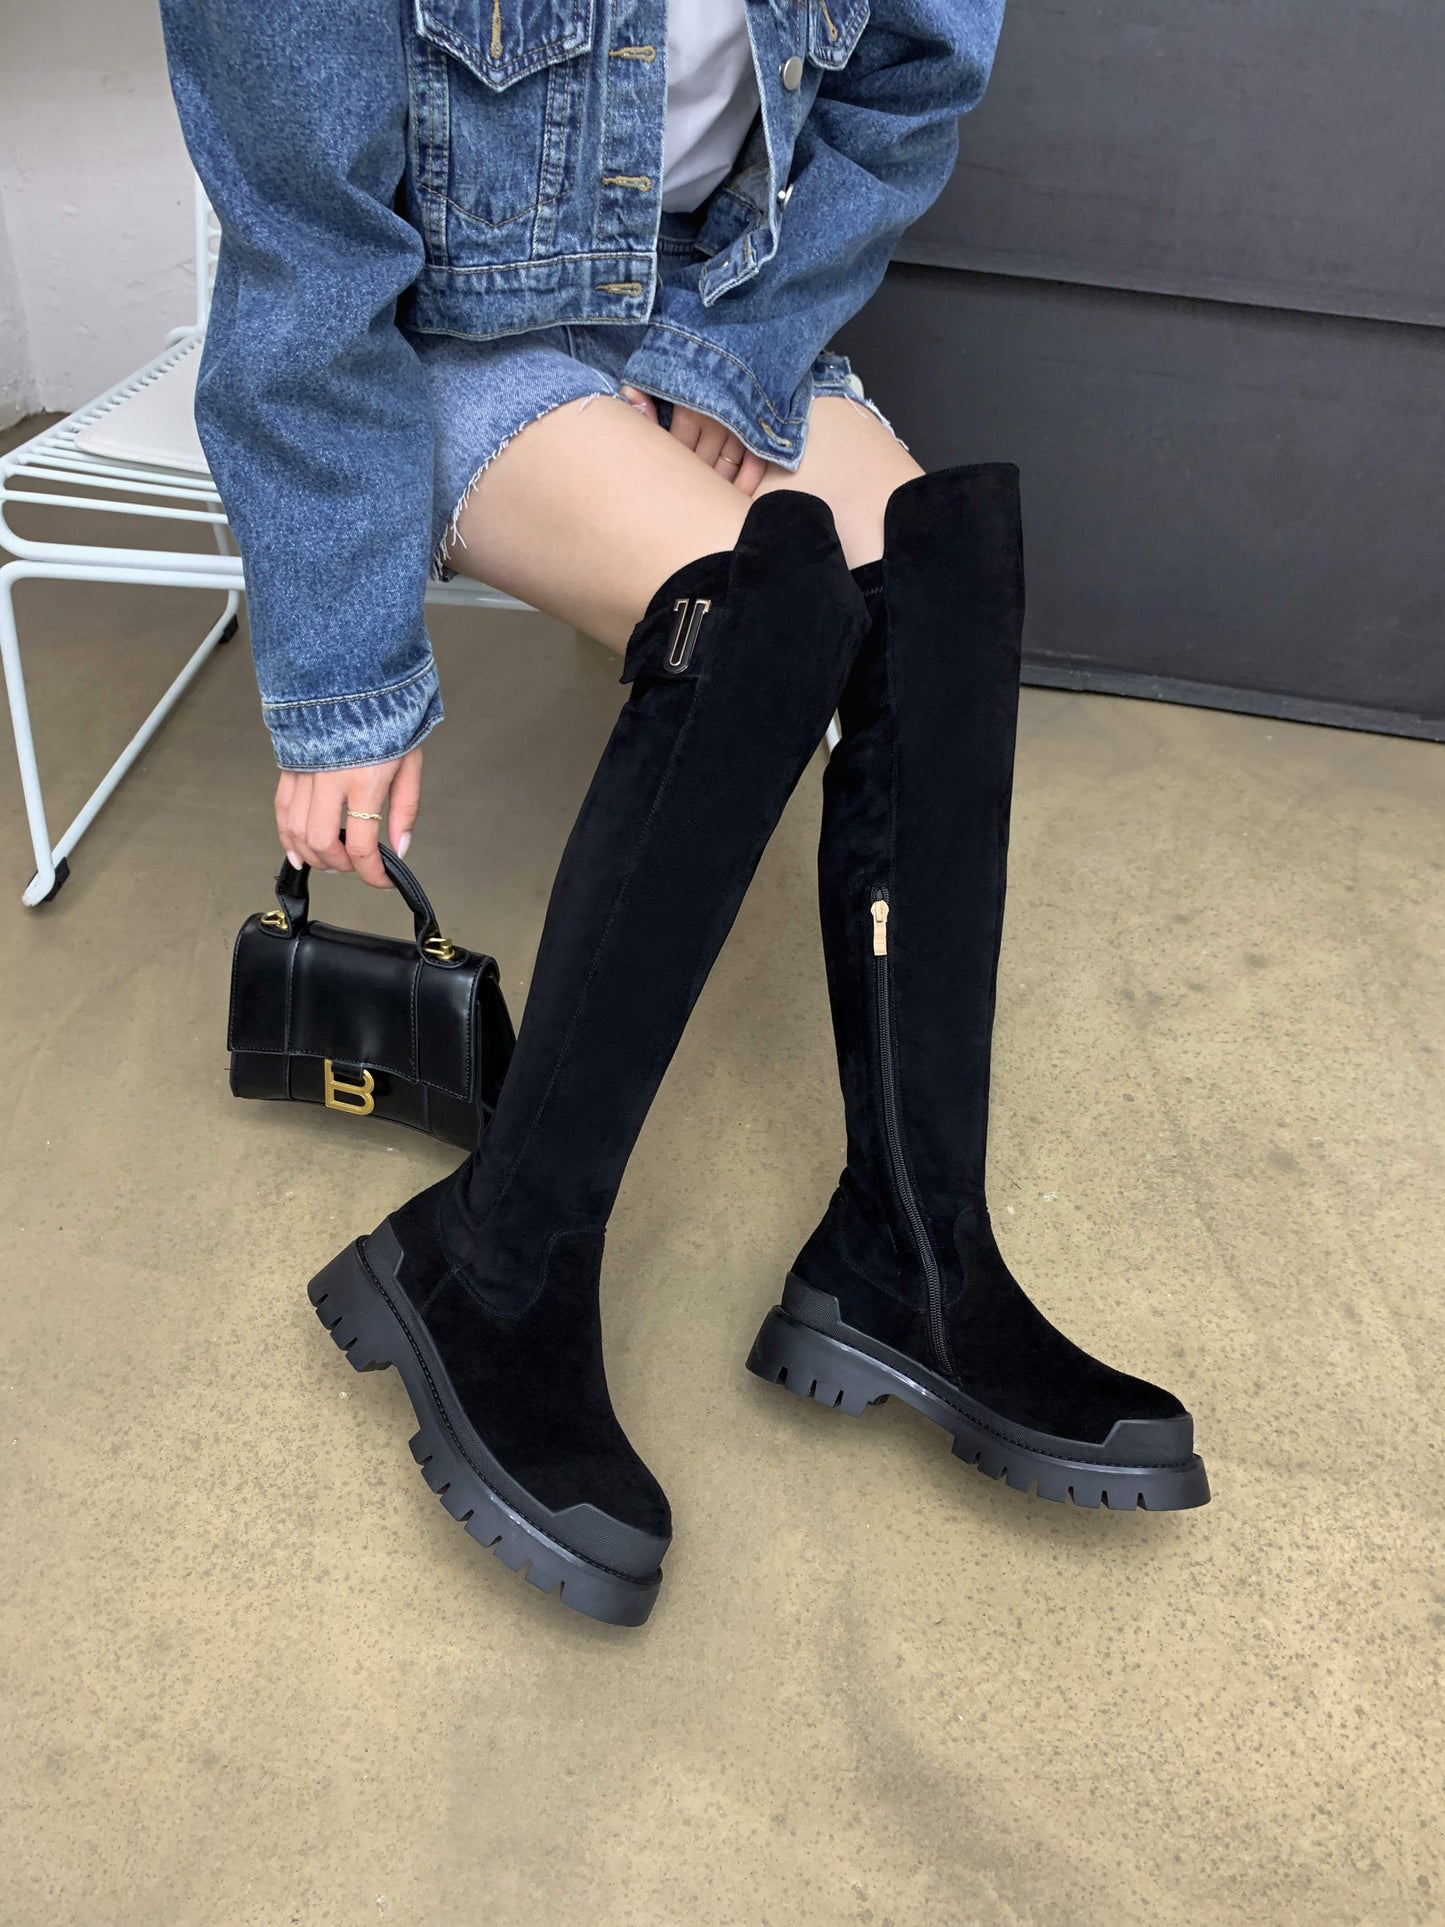 Leather platform thigh high boots round toe casual winter shoes Chunky flats